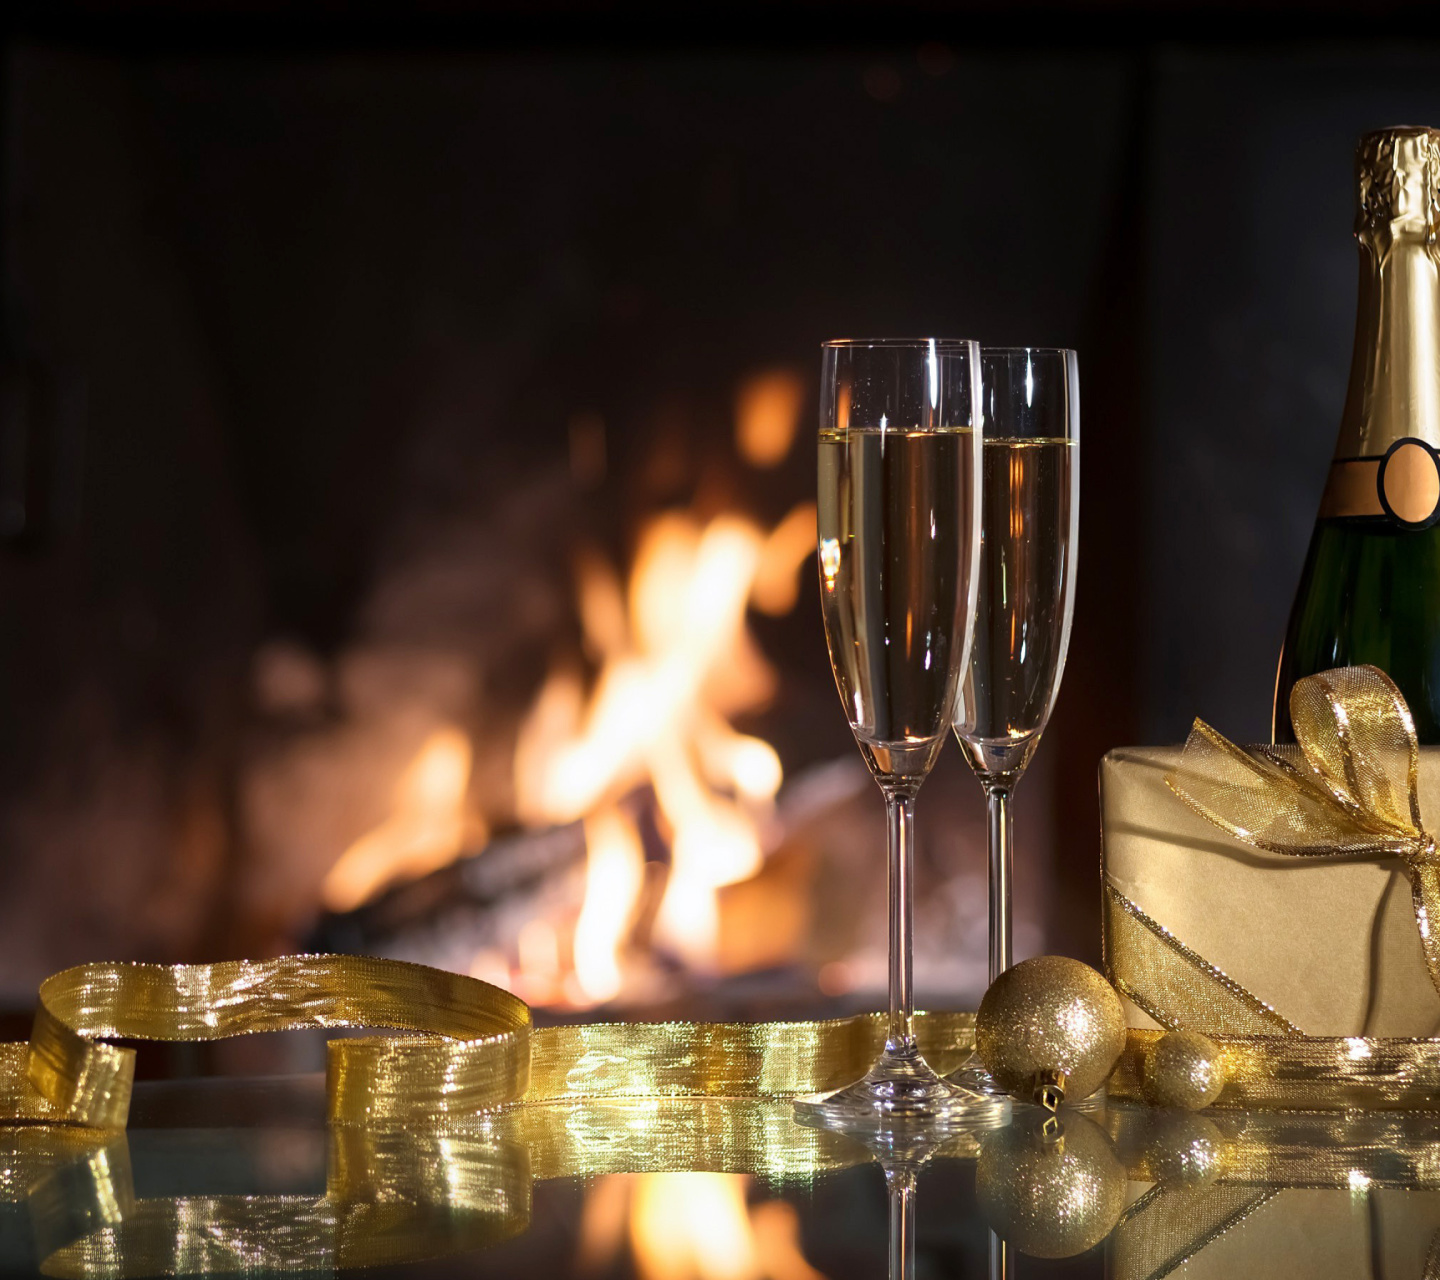 Das Champagne and Fireplace Wallpaper 1440x1280